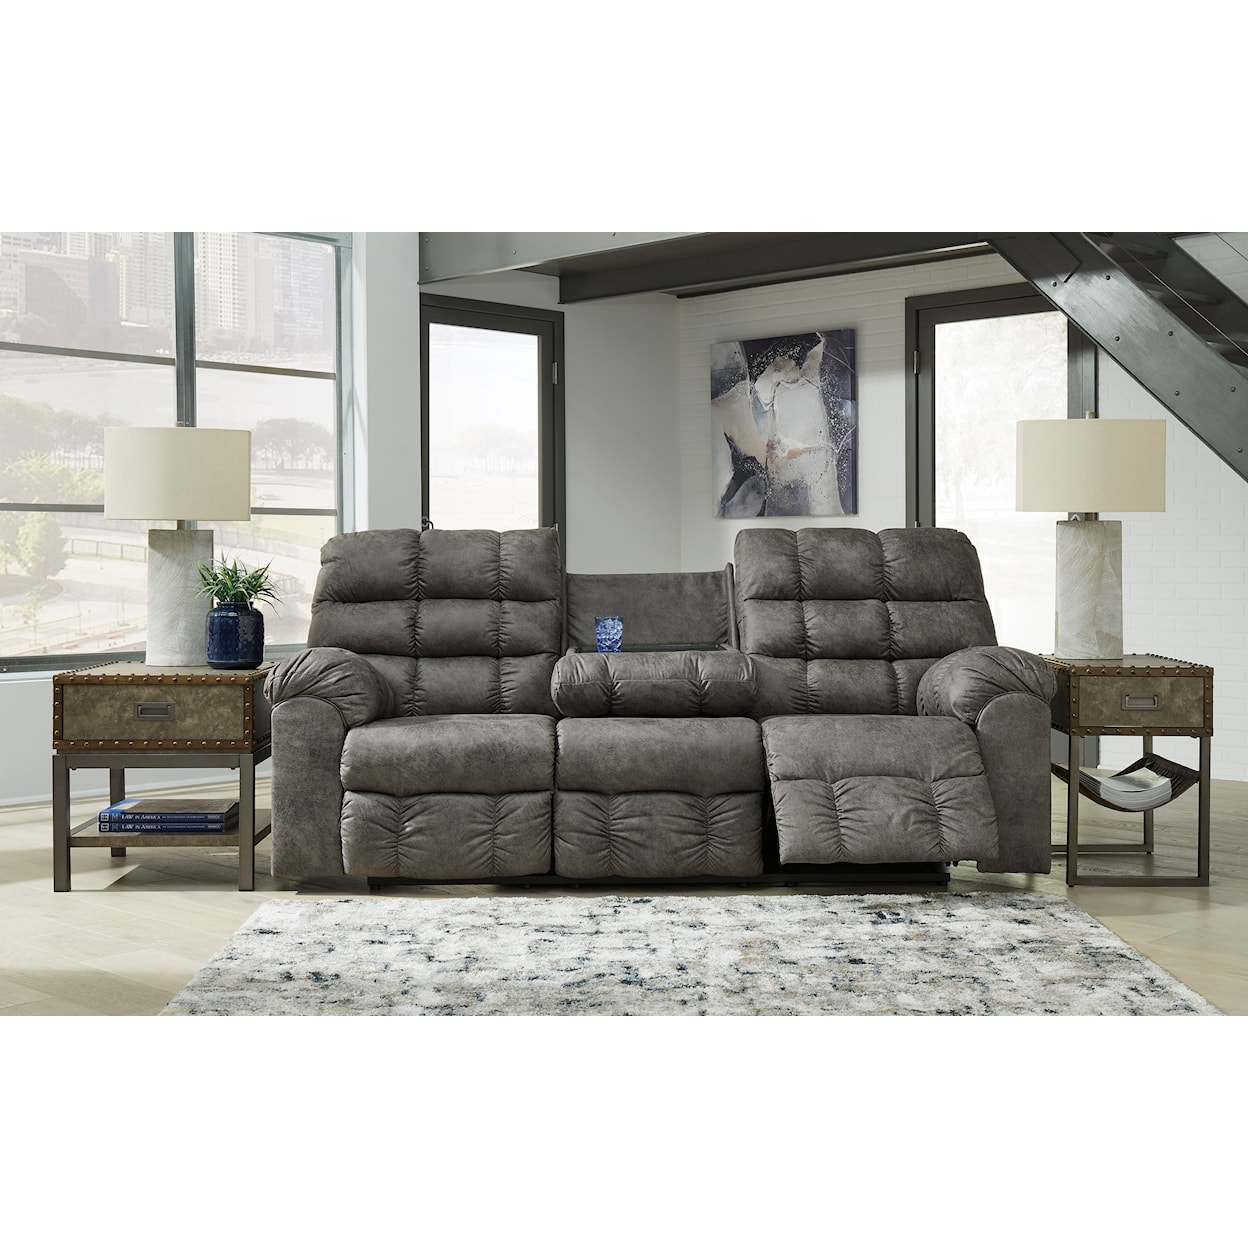 Ashley Signature Design Derwin Reclining Sofa with Drop Down Table